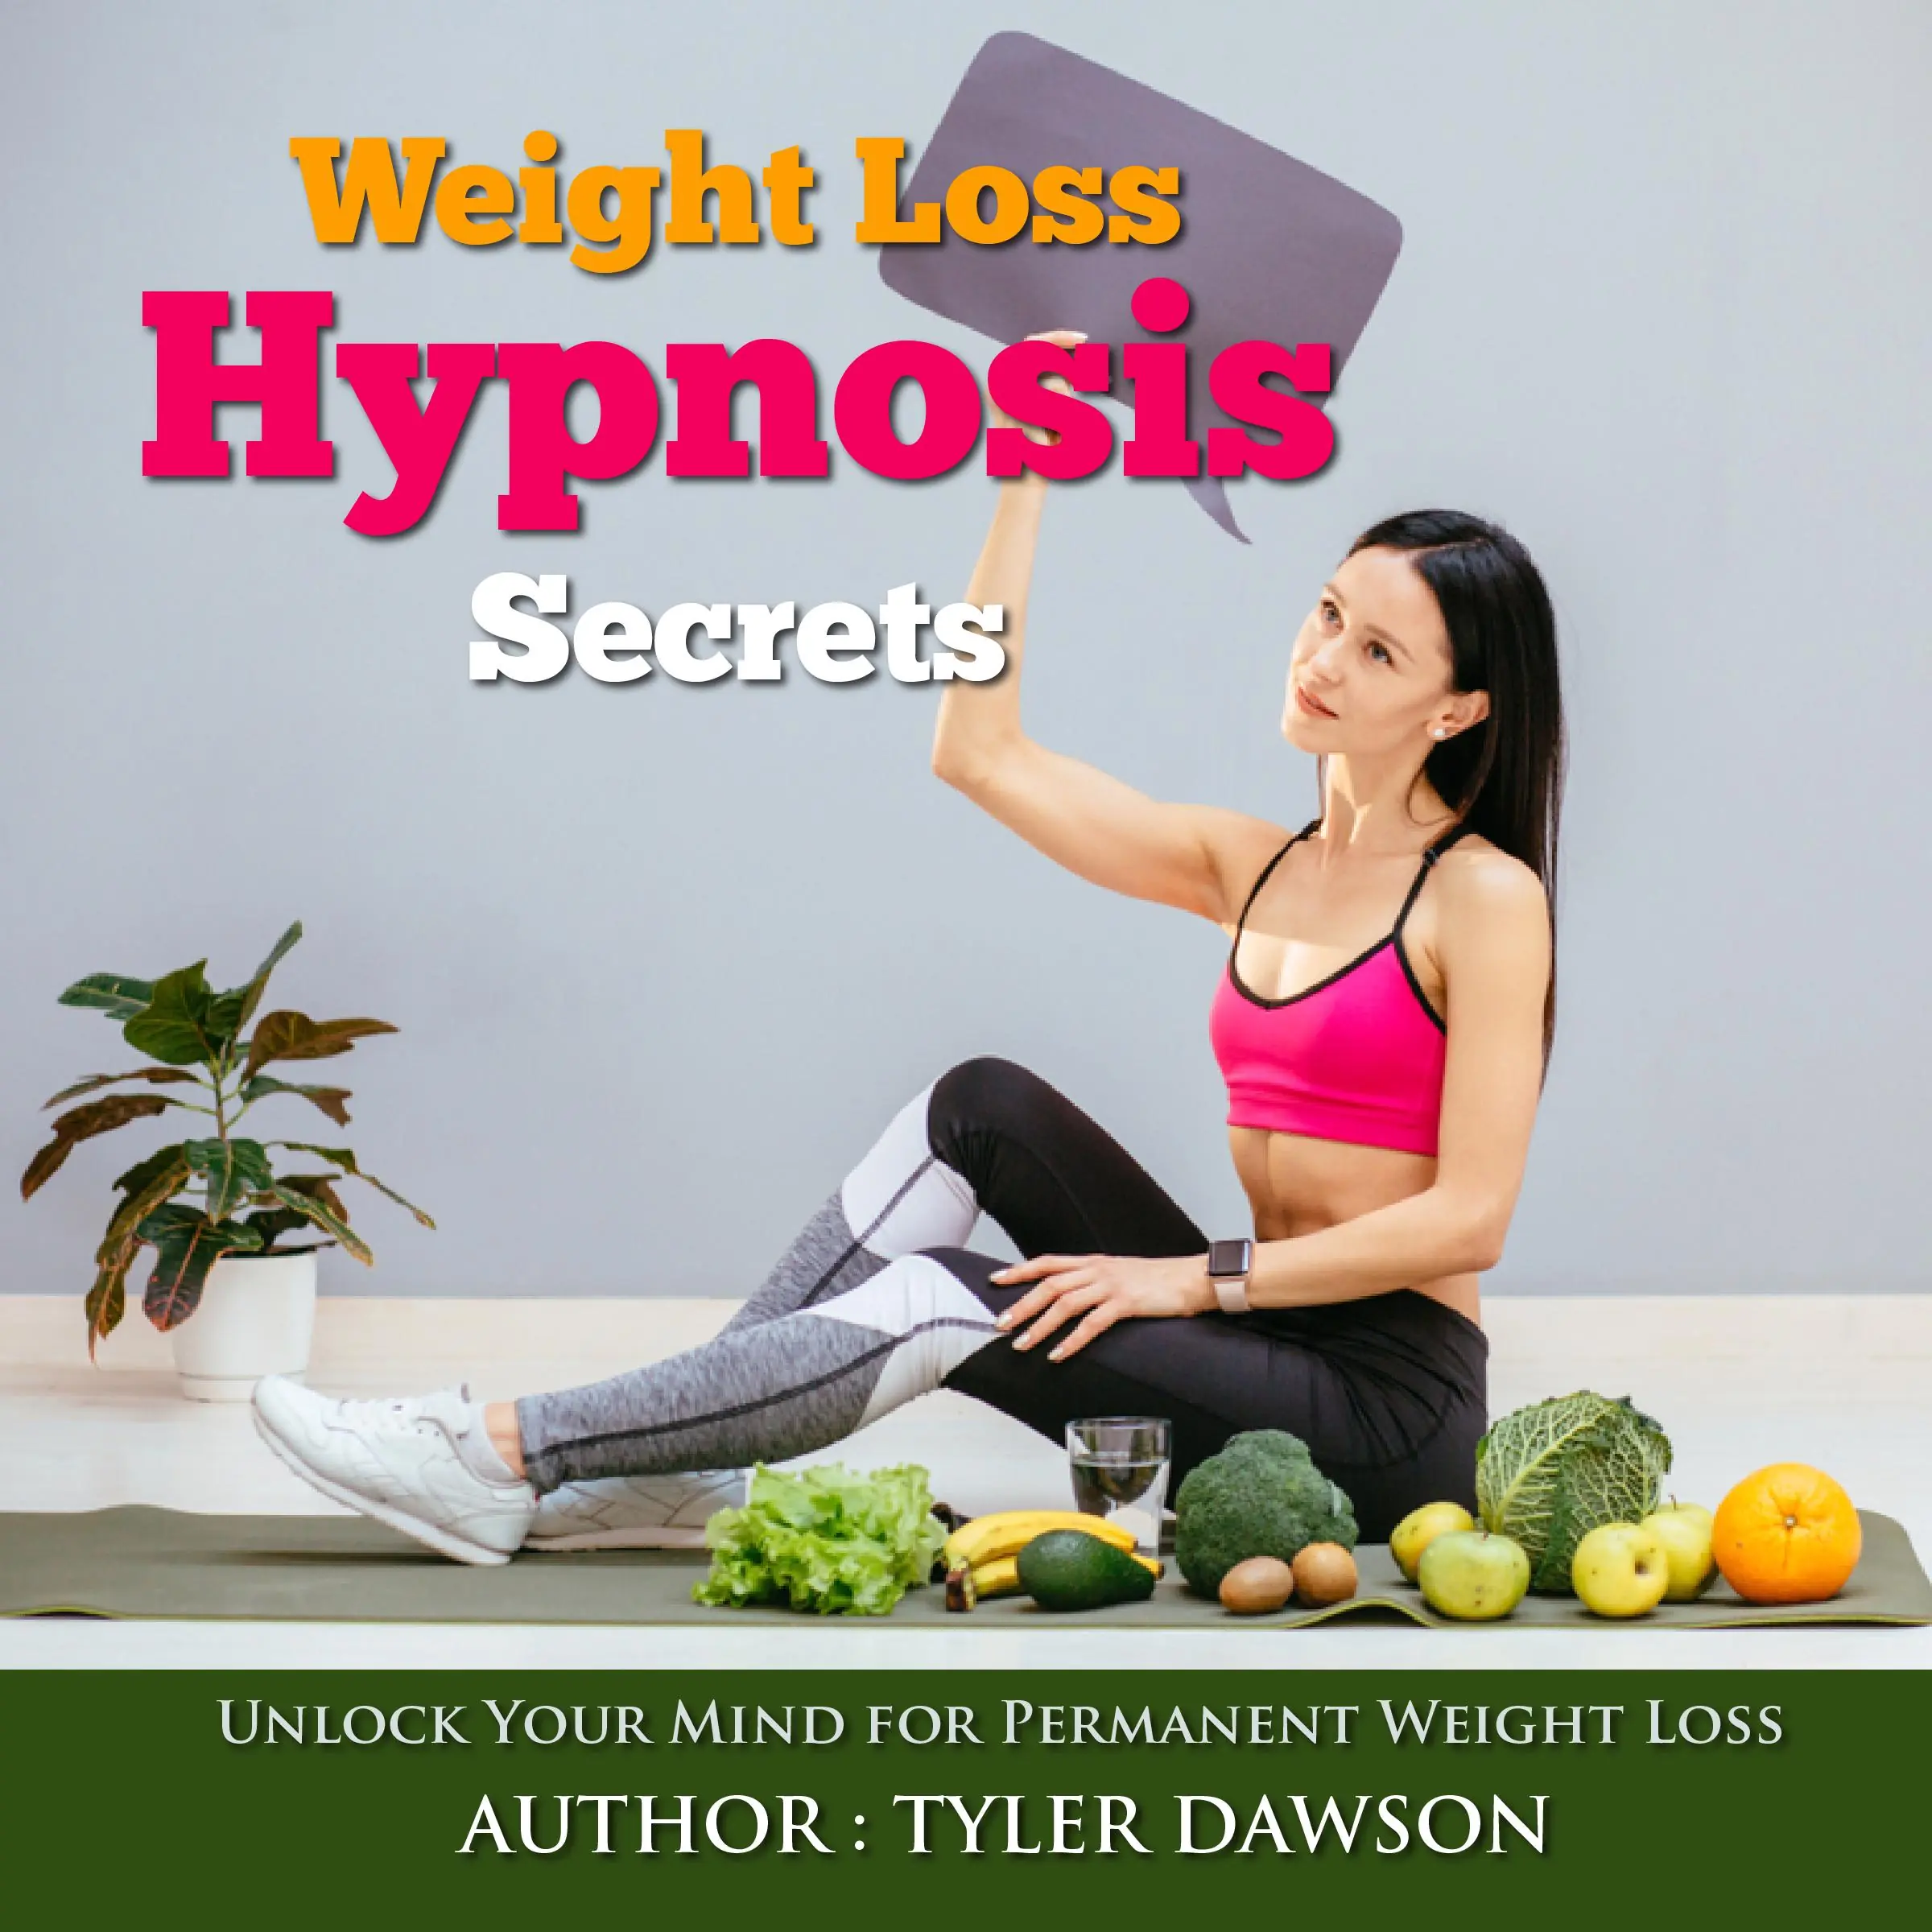 Weight Loss Hypnosis Secrets: Unlock Your Mind for Permanent Weight Loss by Tyler Dawson Audiobook